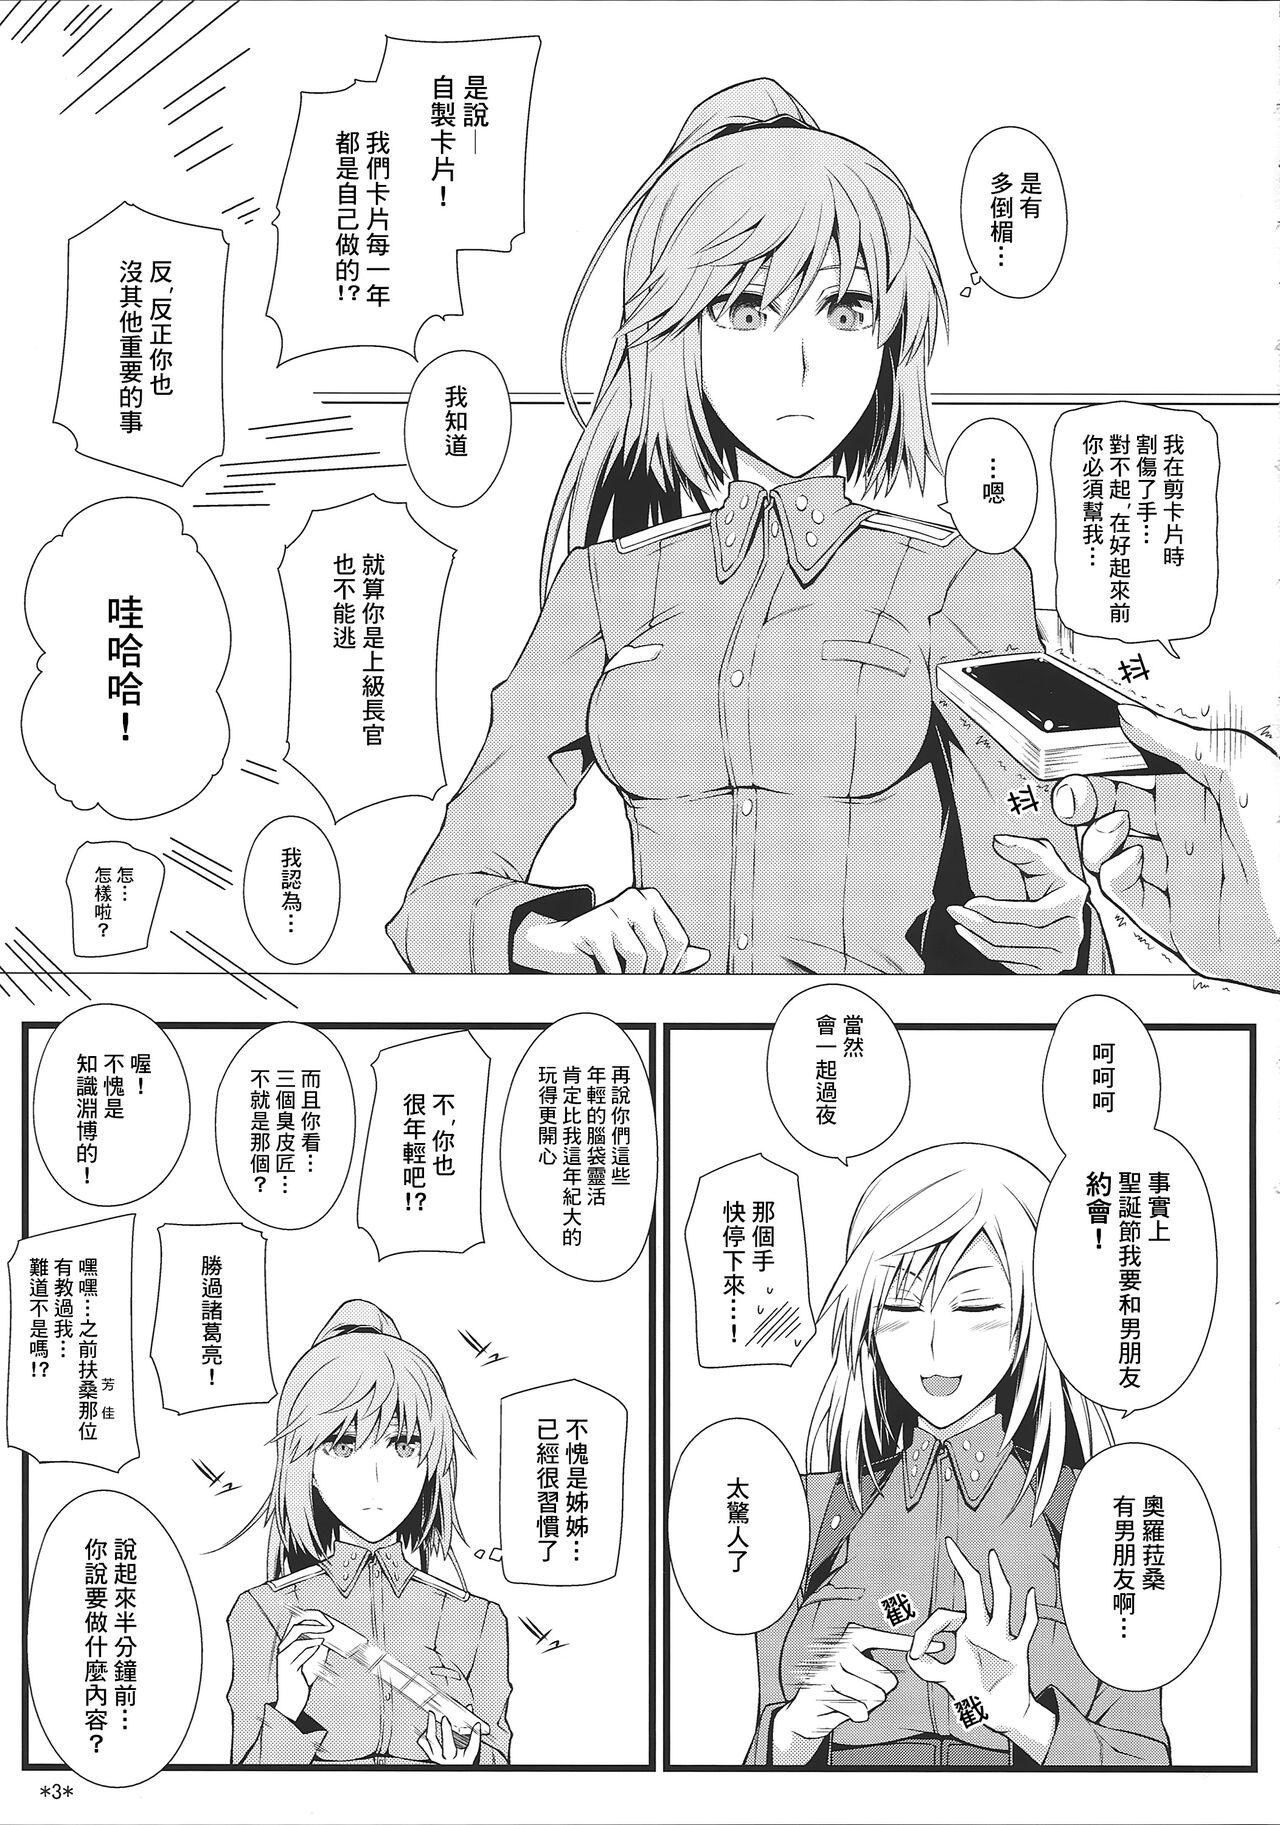 Camwhore KARLSLAND SYNDROME 3 - Strike witches Online - Page 5